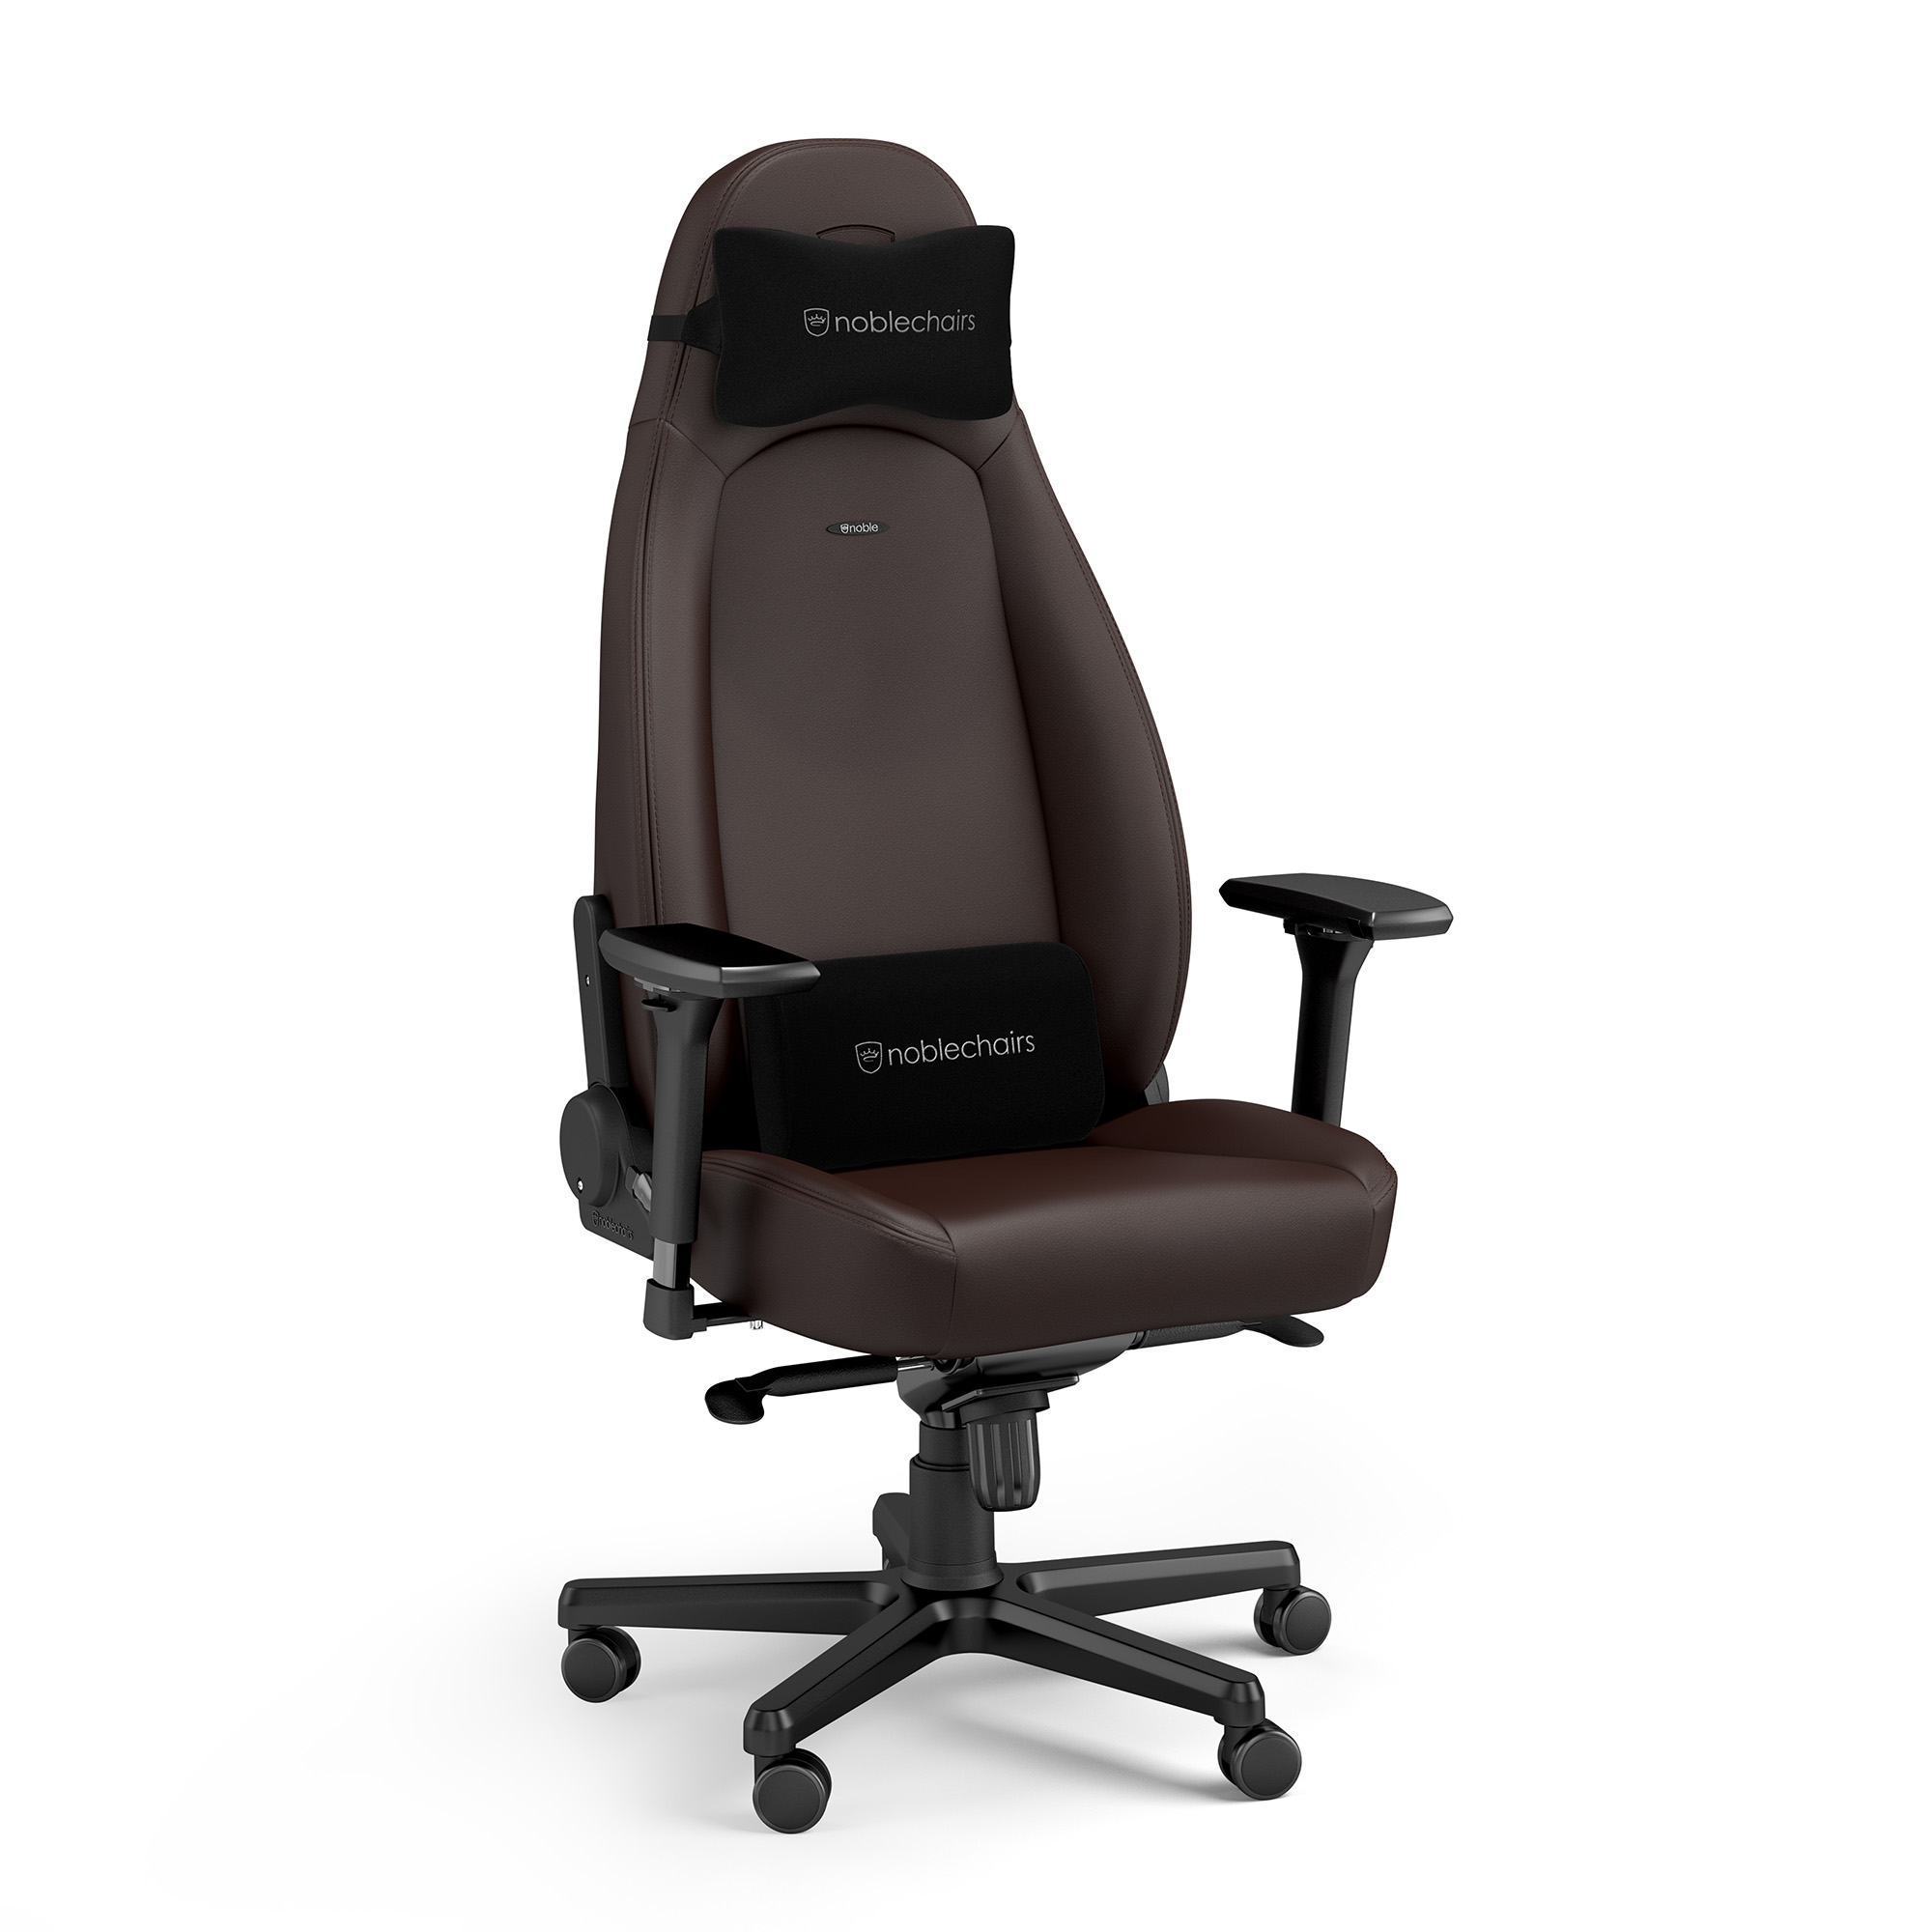 noblechairs - noblechairs ICON Gaming Chair - Java Edition